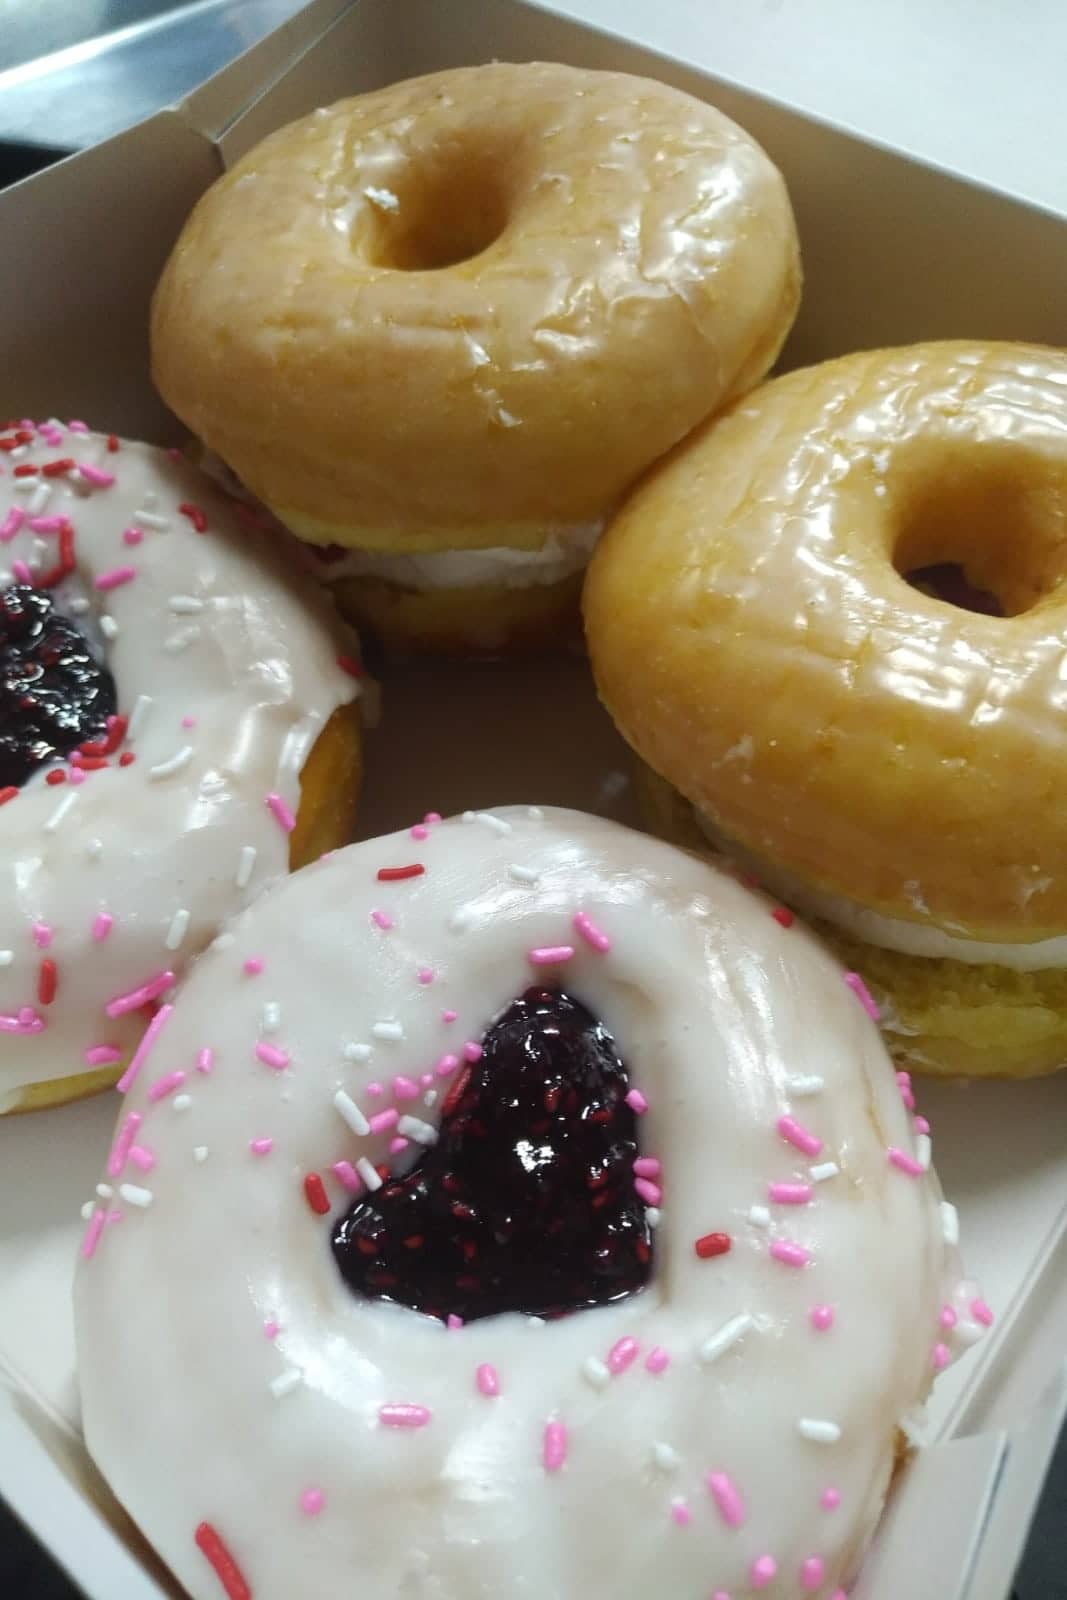 Valentines Day doughnuts from Donut Friend at Vegan Lot!